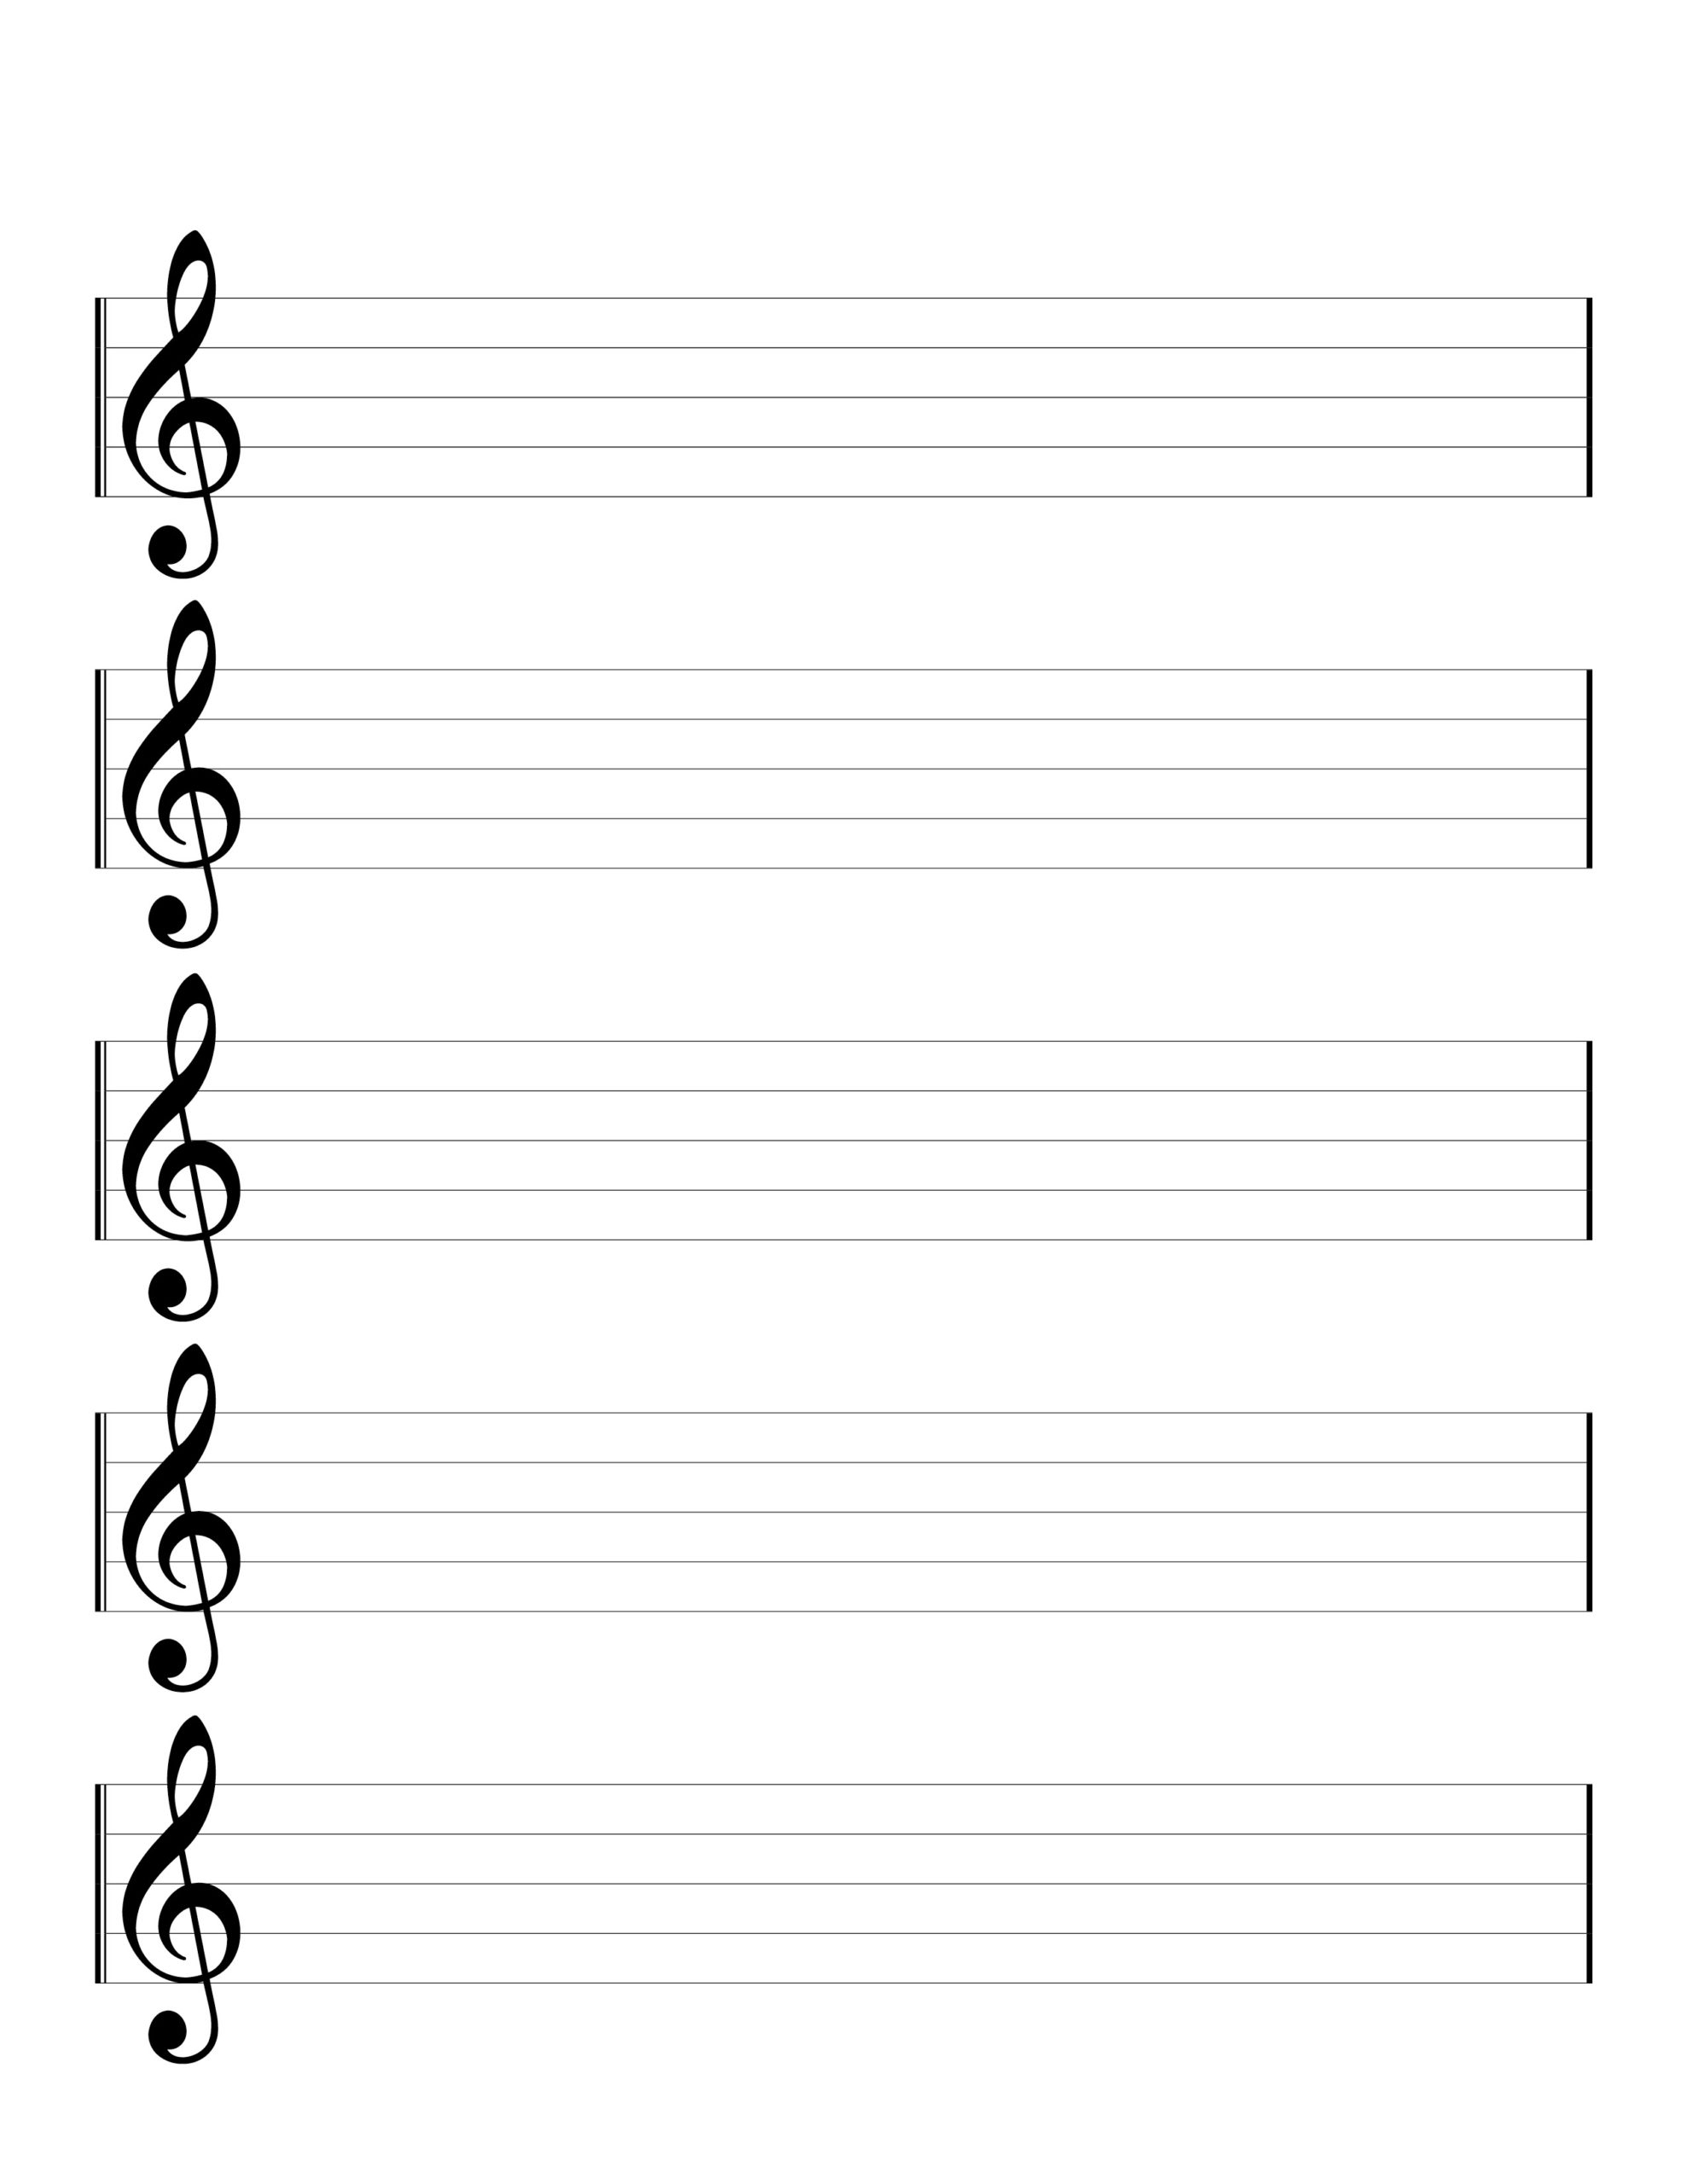 Printable Blank Music Staff Paper So You Don t Have To Buy Sheet Music